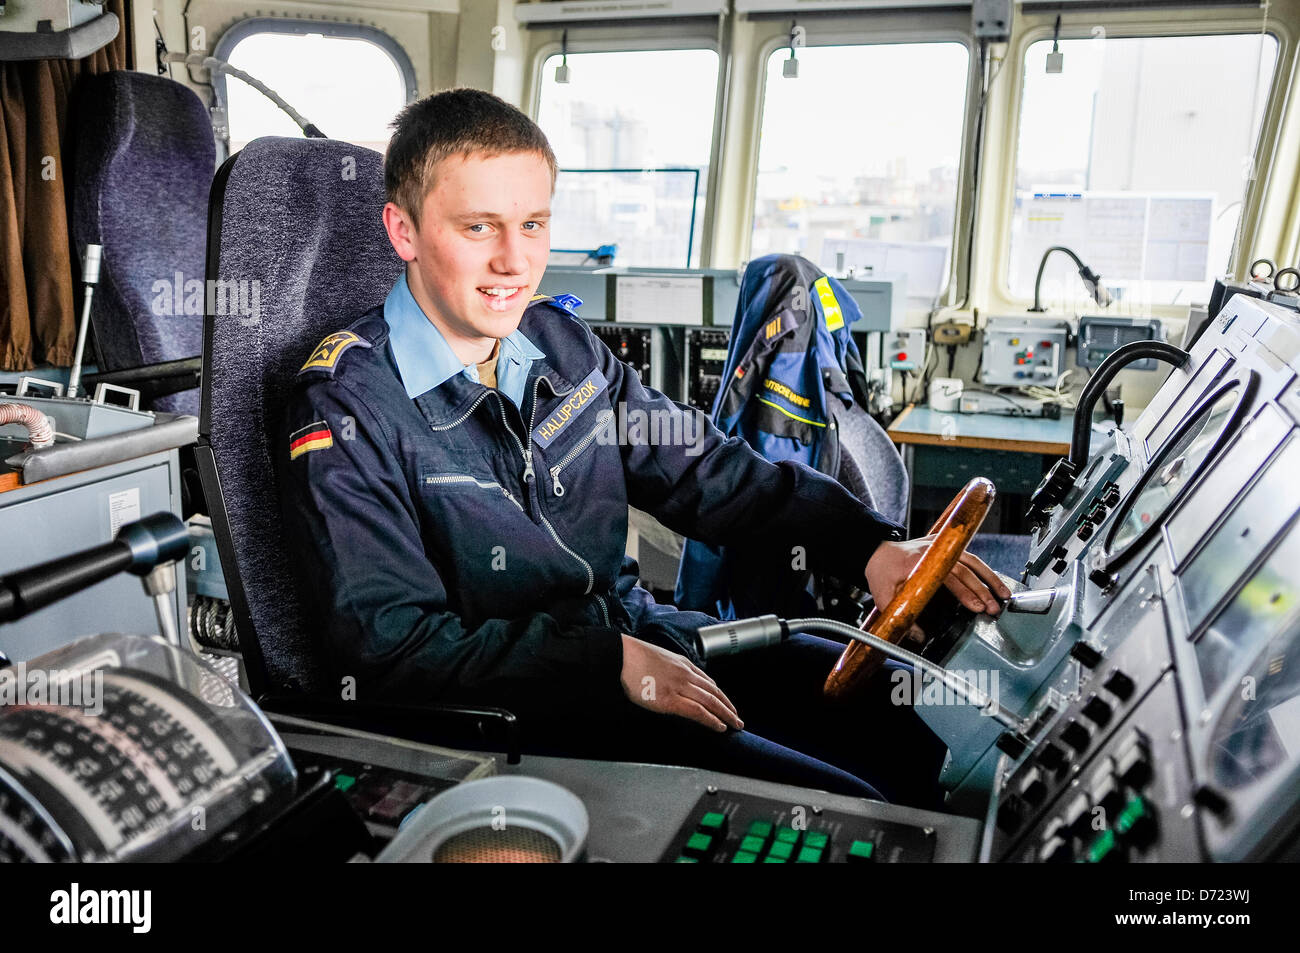 Belfast, Northern Ireland. 26th April 2013.  Fähnrich zur See (Midshipman) Halupczok from the German Navy mans the helm of FGS Weilheim from the Standing NATO Mine Countermeasures Group 1 (SNMCG1). Credit: Stephen Barnes/Alamy Live News Stock Photo